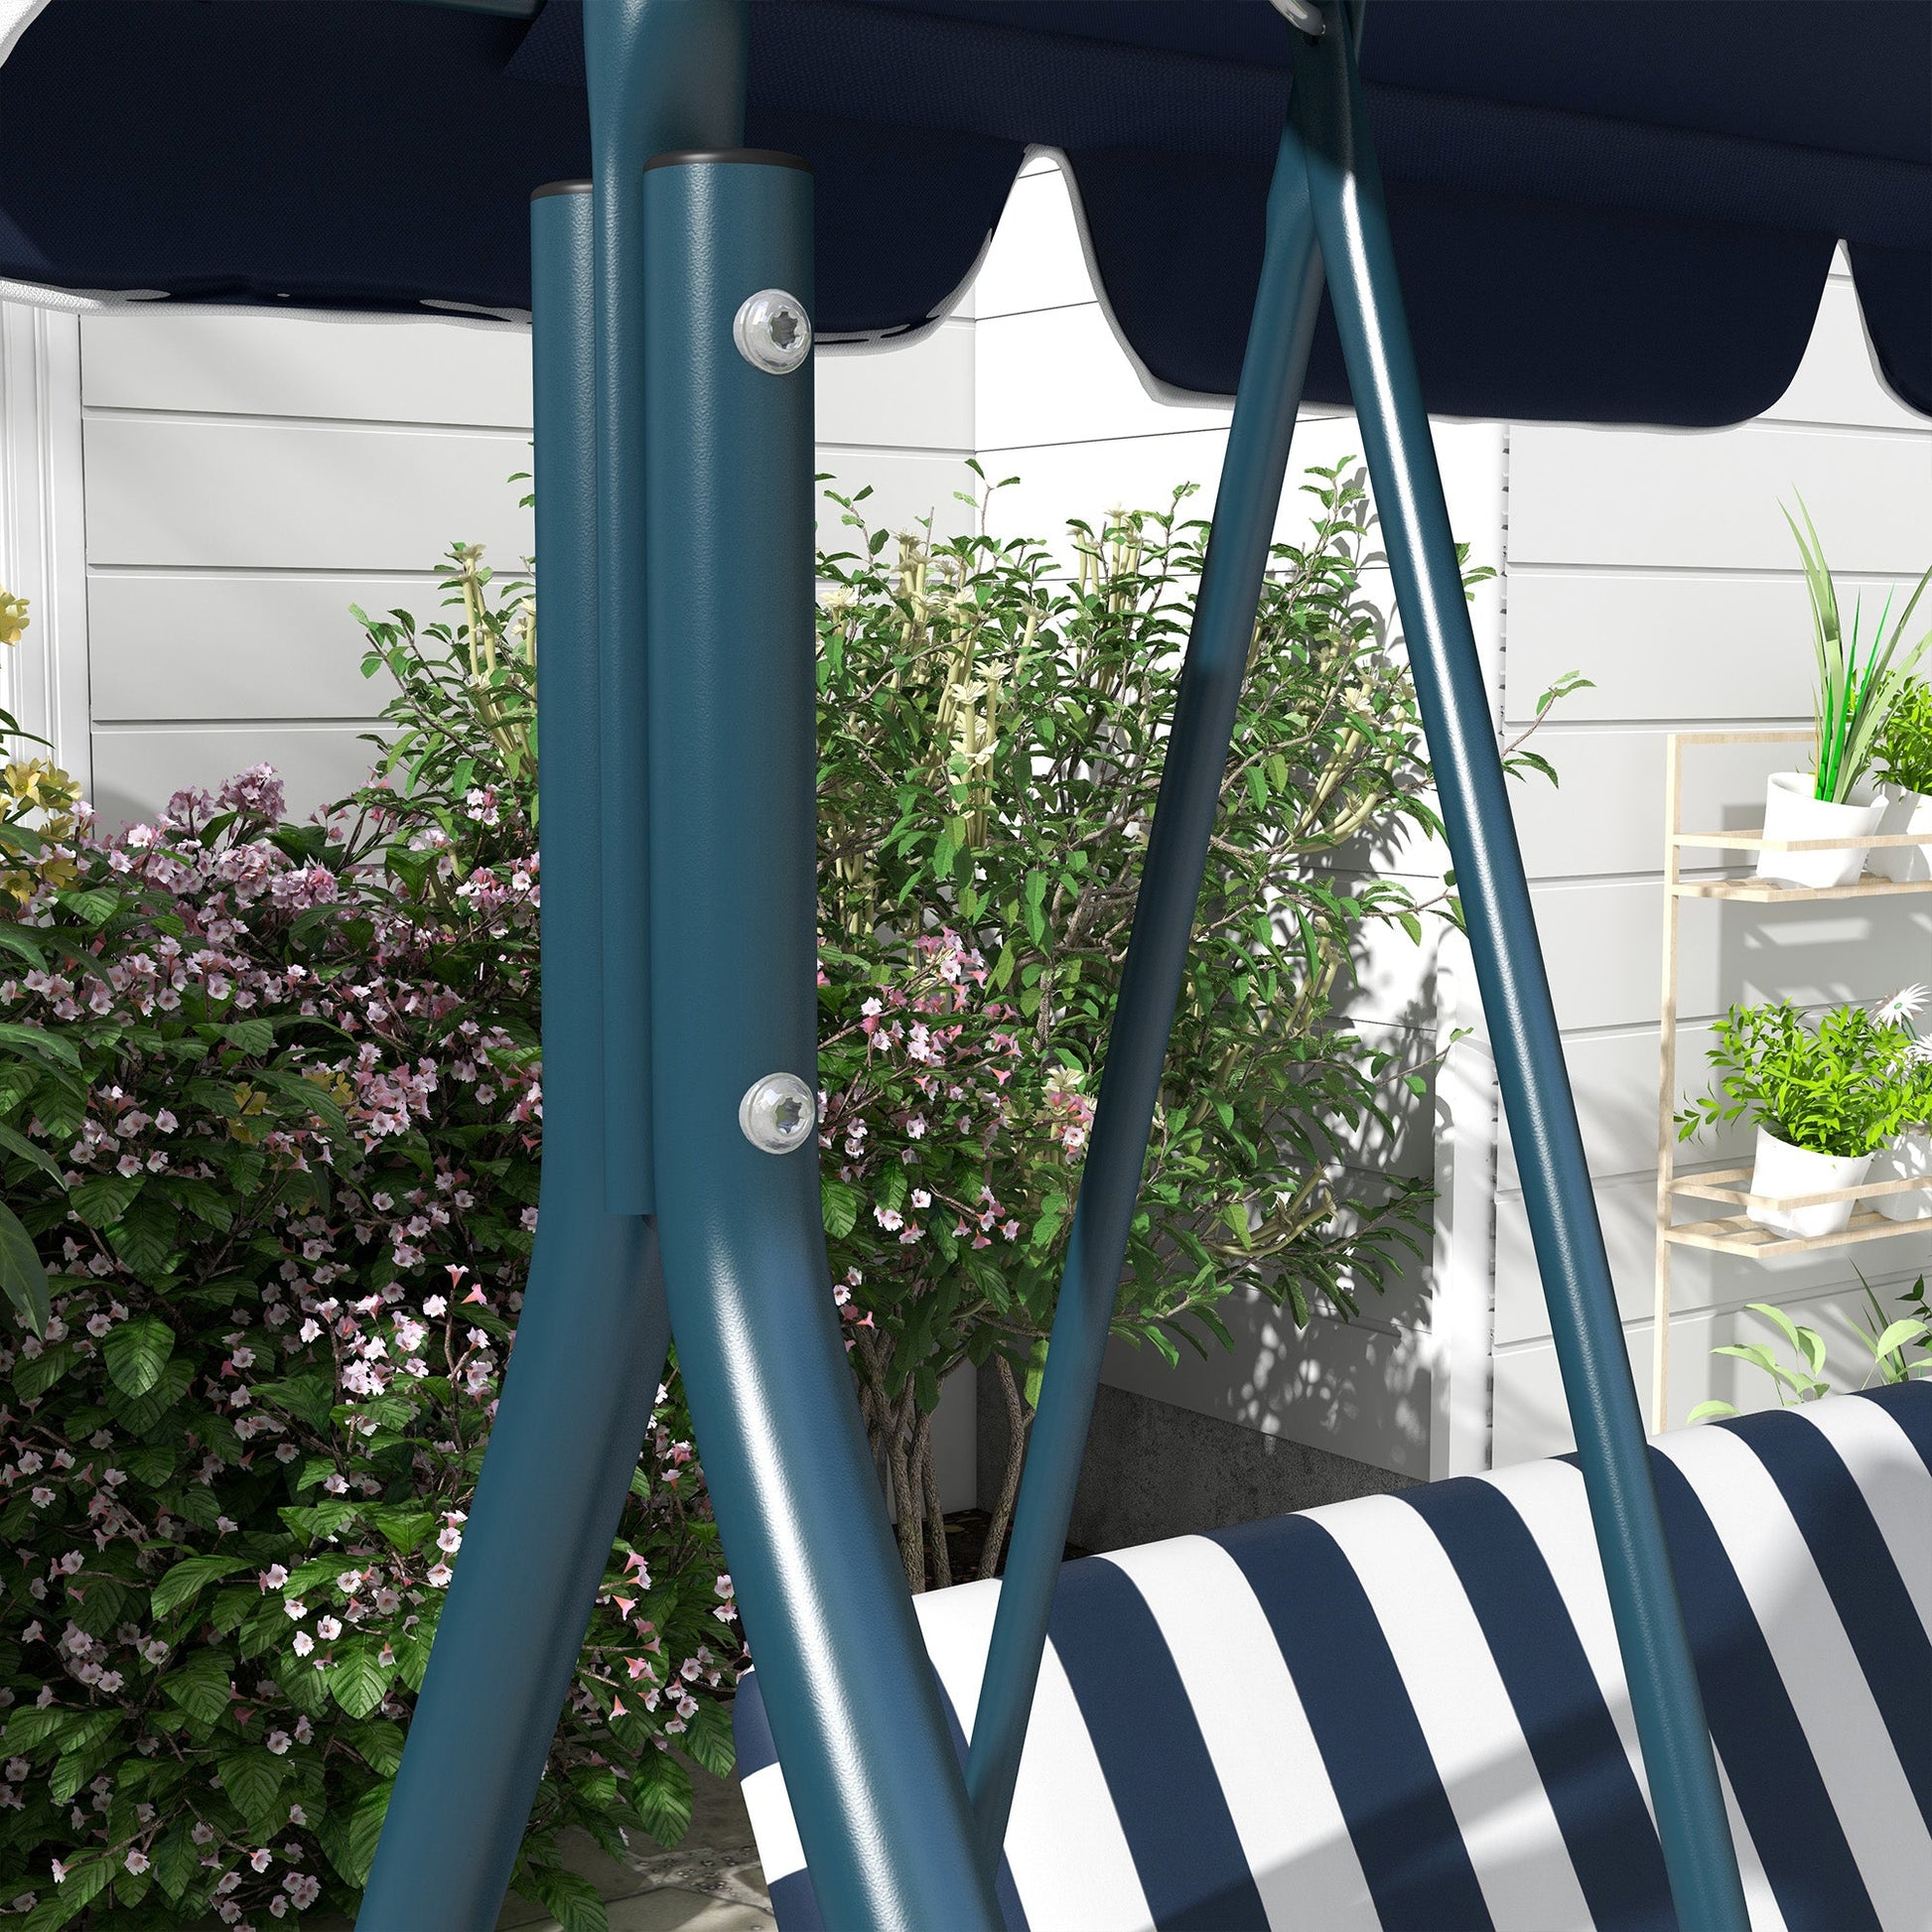 3-Seater Outdoor Porch Swing with Adjustable Canopy, Patio Swing Chair for Garden, Poolside, Backyard, Blue and White at Gallery Canada